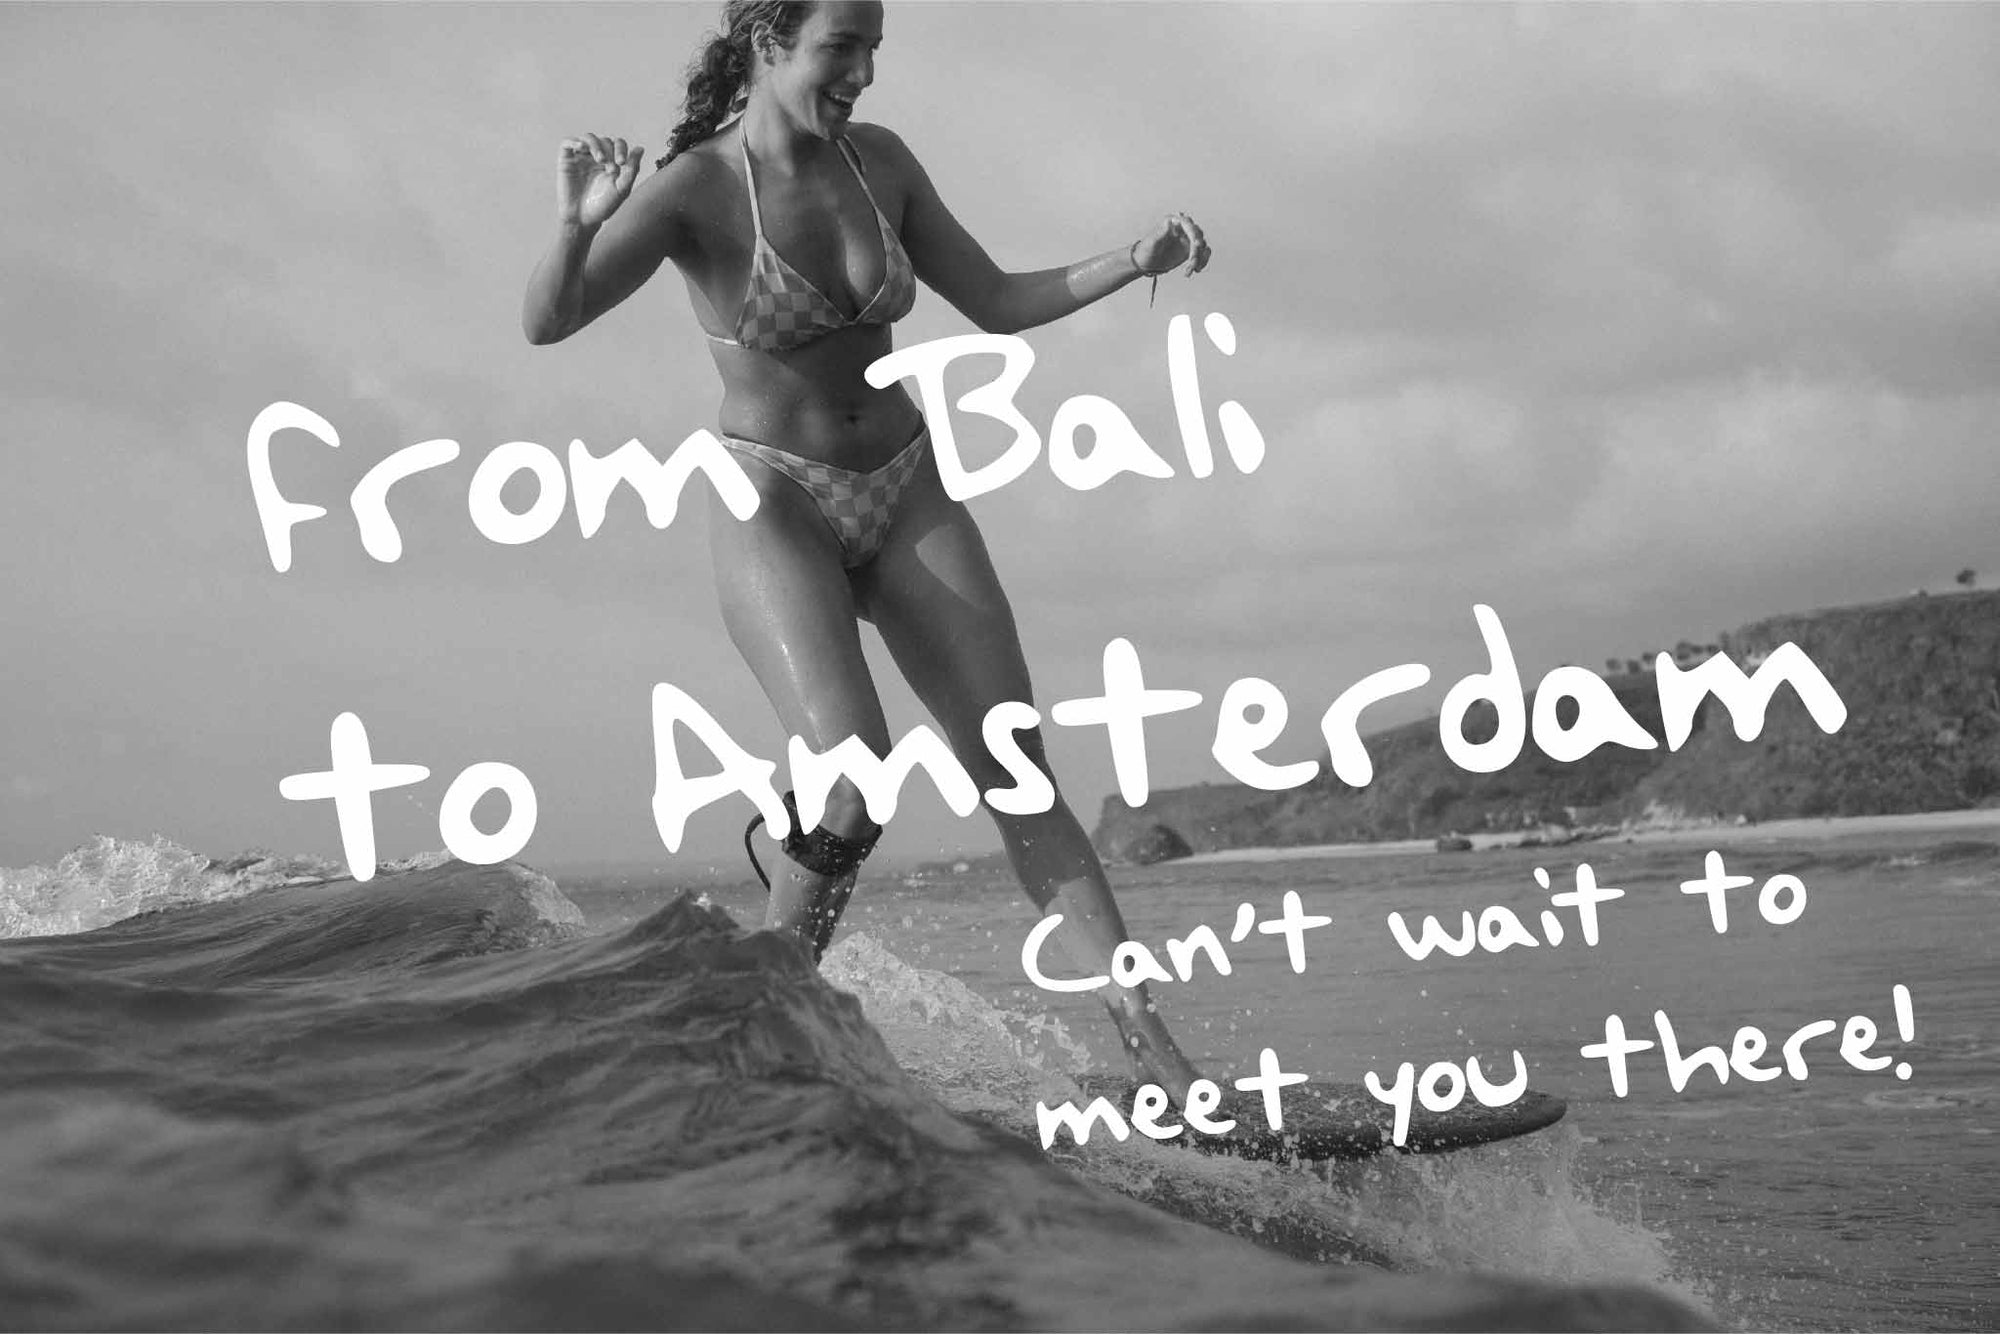 Photo of surfer with text: from Bali to Amsterdam, Can't wait to meet you there